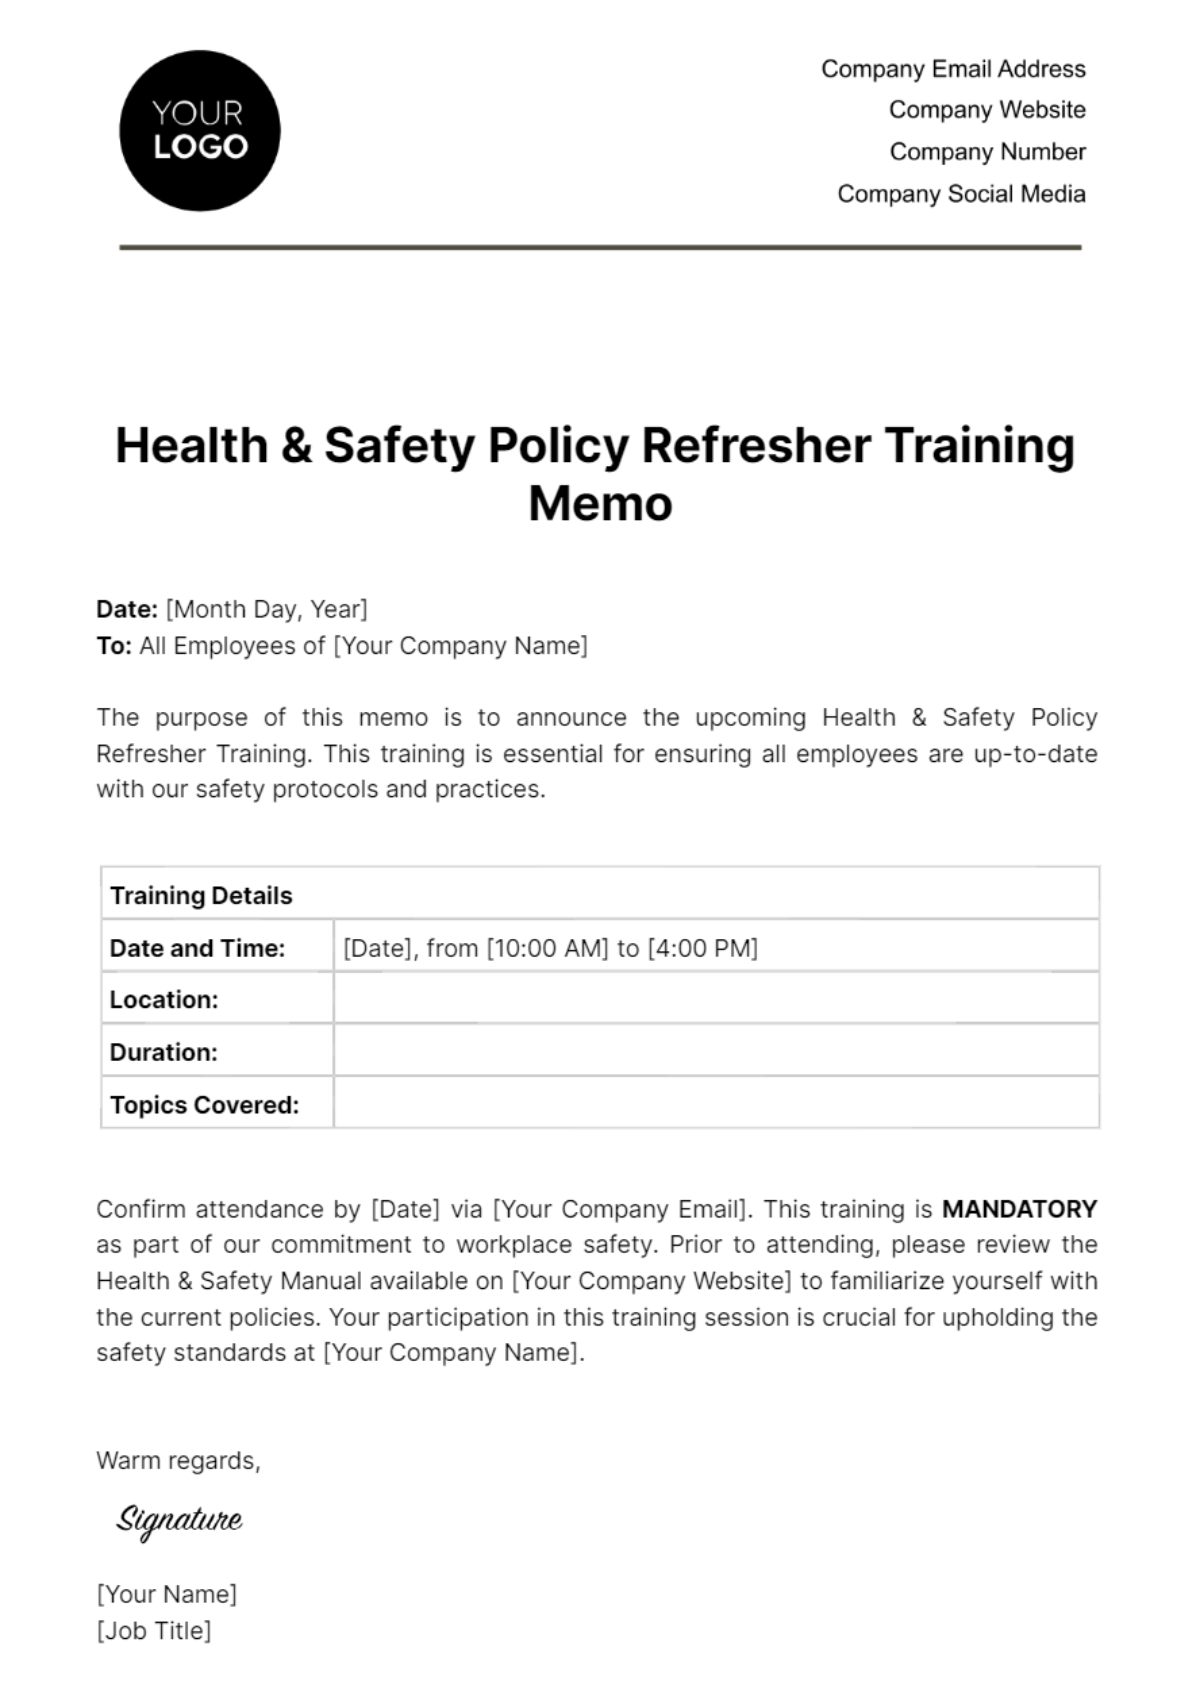 Health & Safety Policy Refresher Training Memo Template